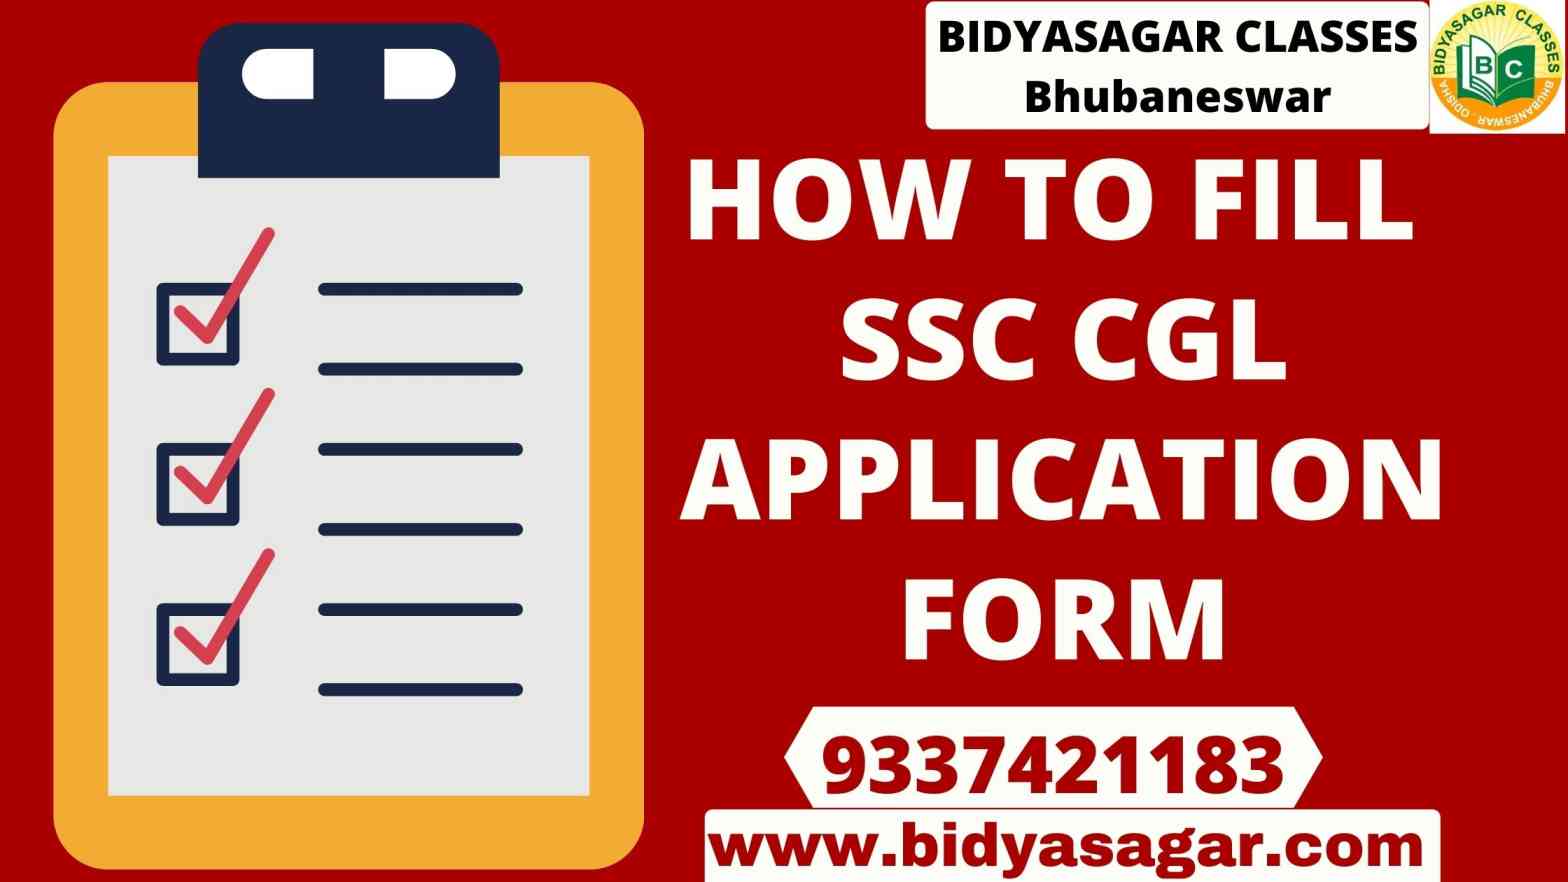 How to Fill SSC CGL Application Form 2020-21?